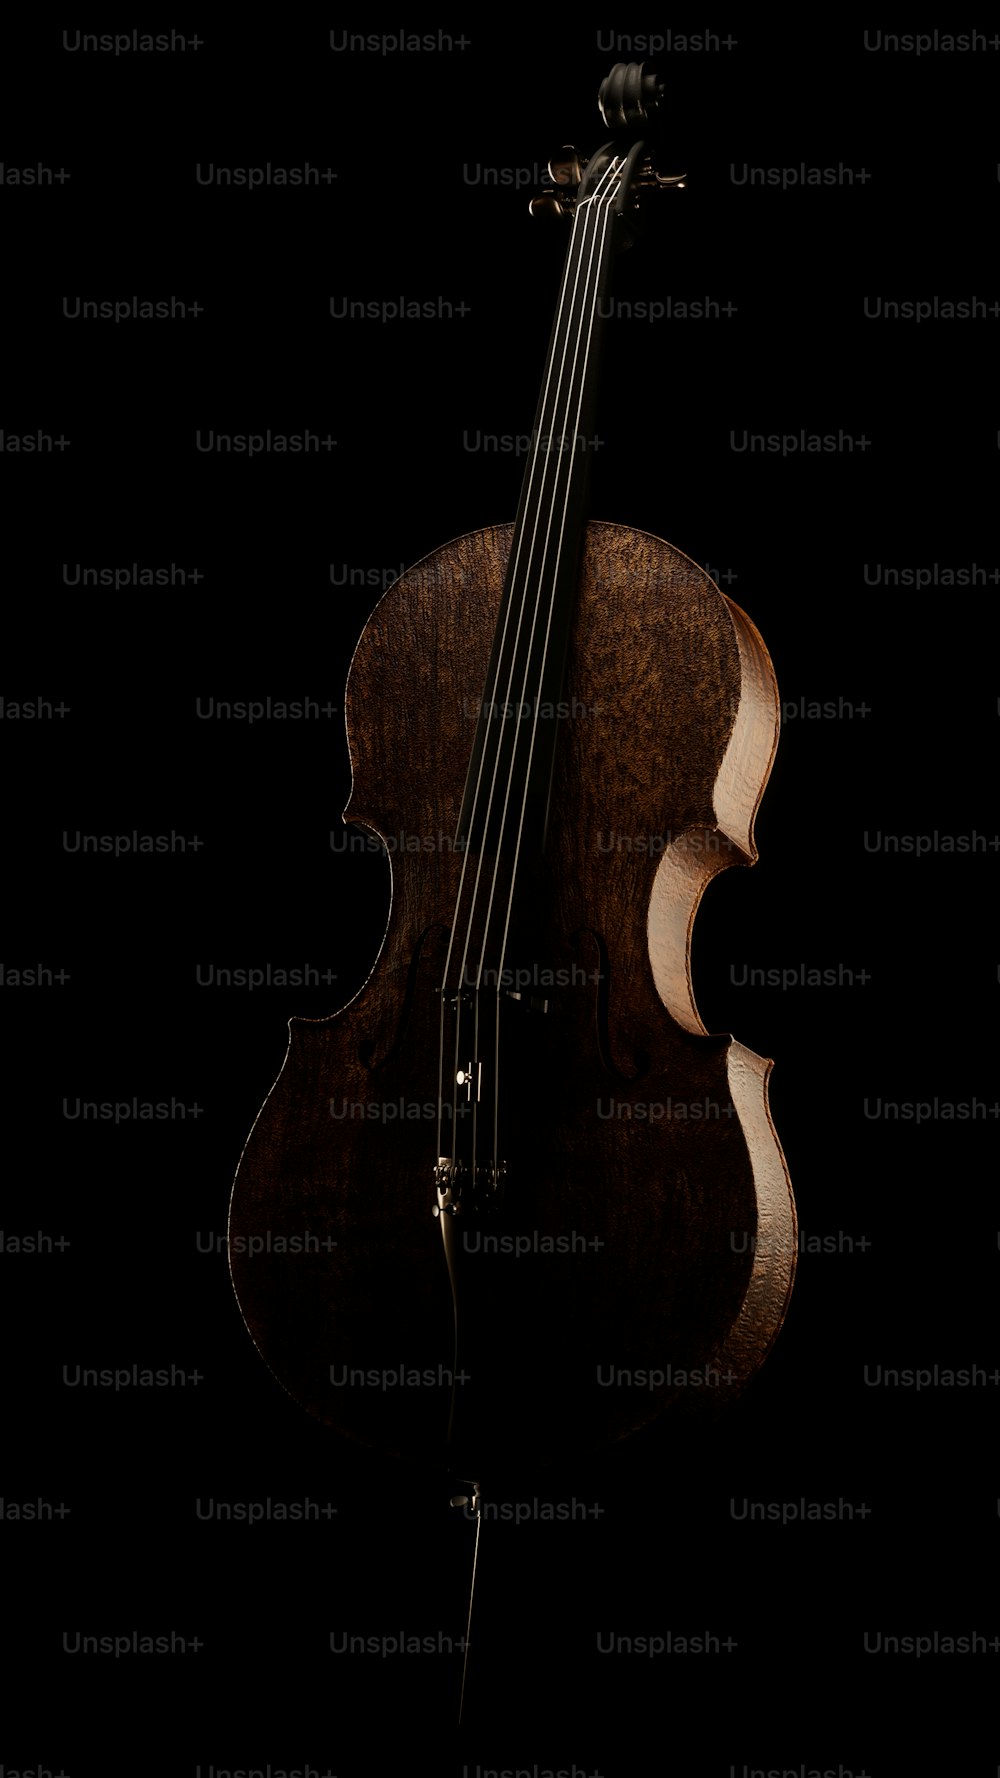 a double bass is shown against a black background